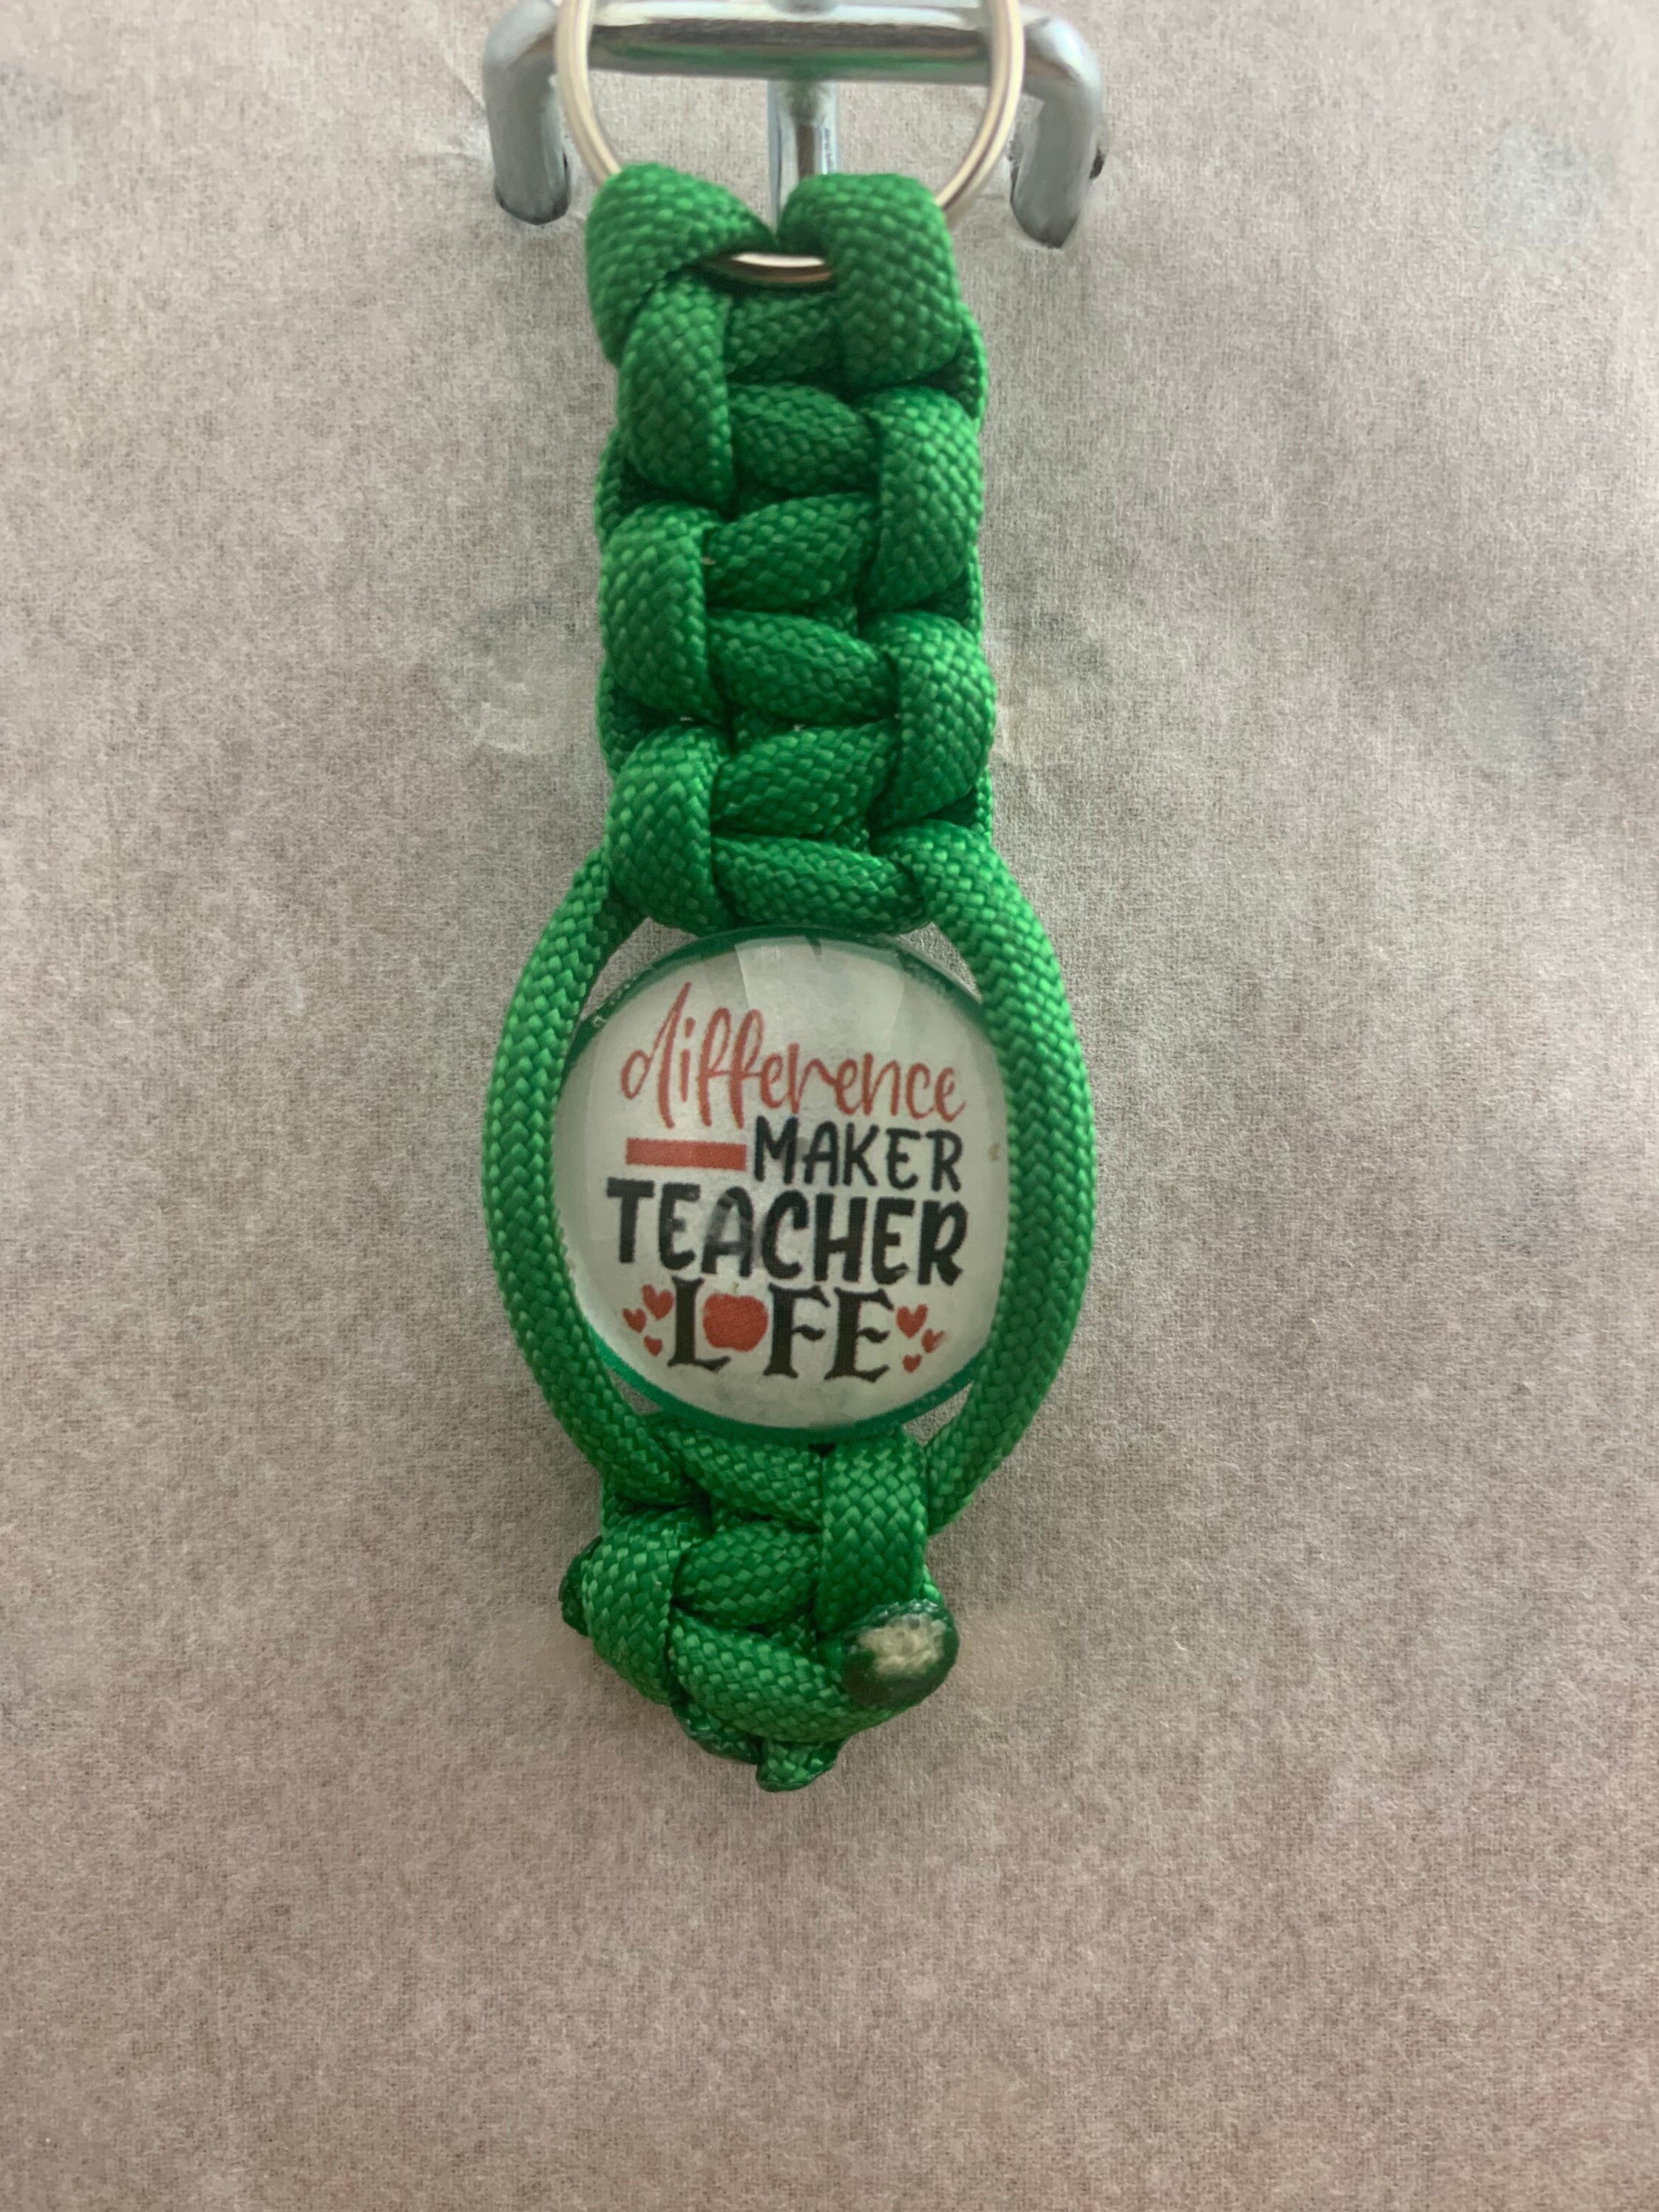 TimsParacordStore Difference Maker Teacher Appreciation Paracord Keychain